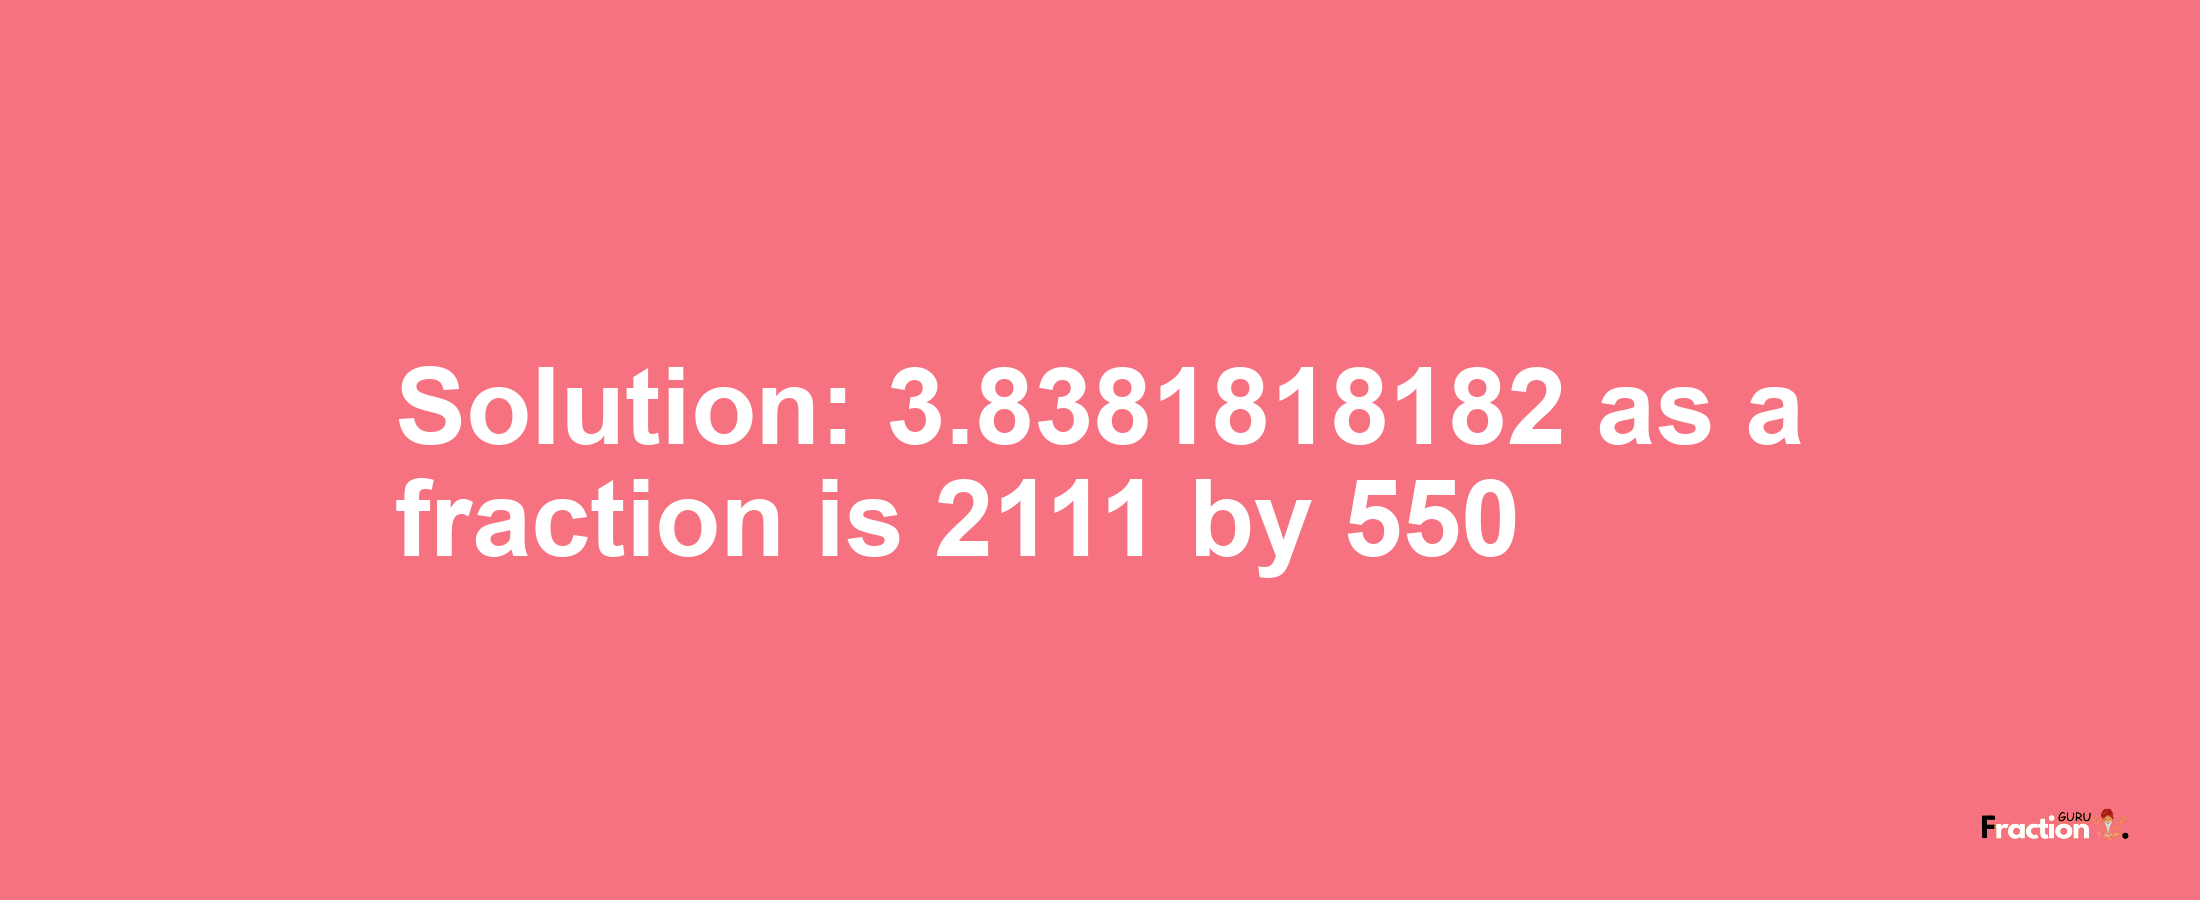 Solution:3.8381818182 as a fraction is 2111/550